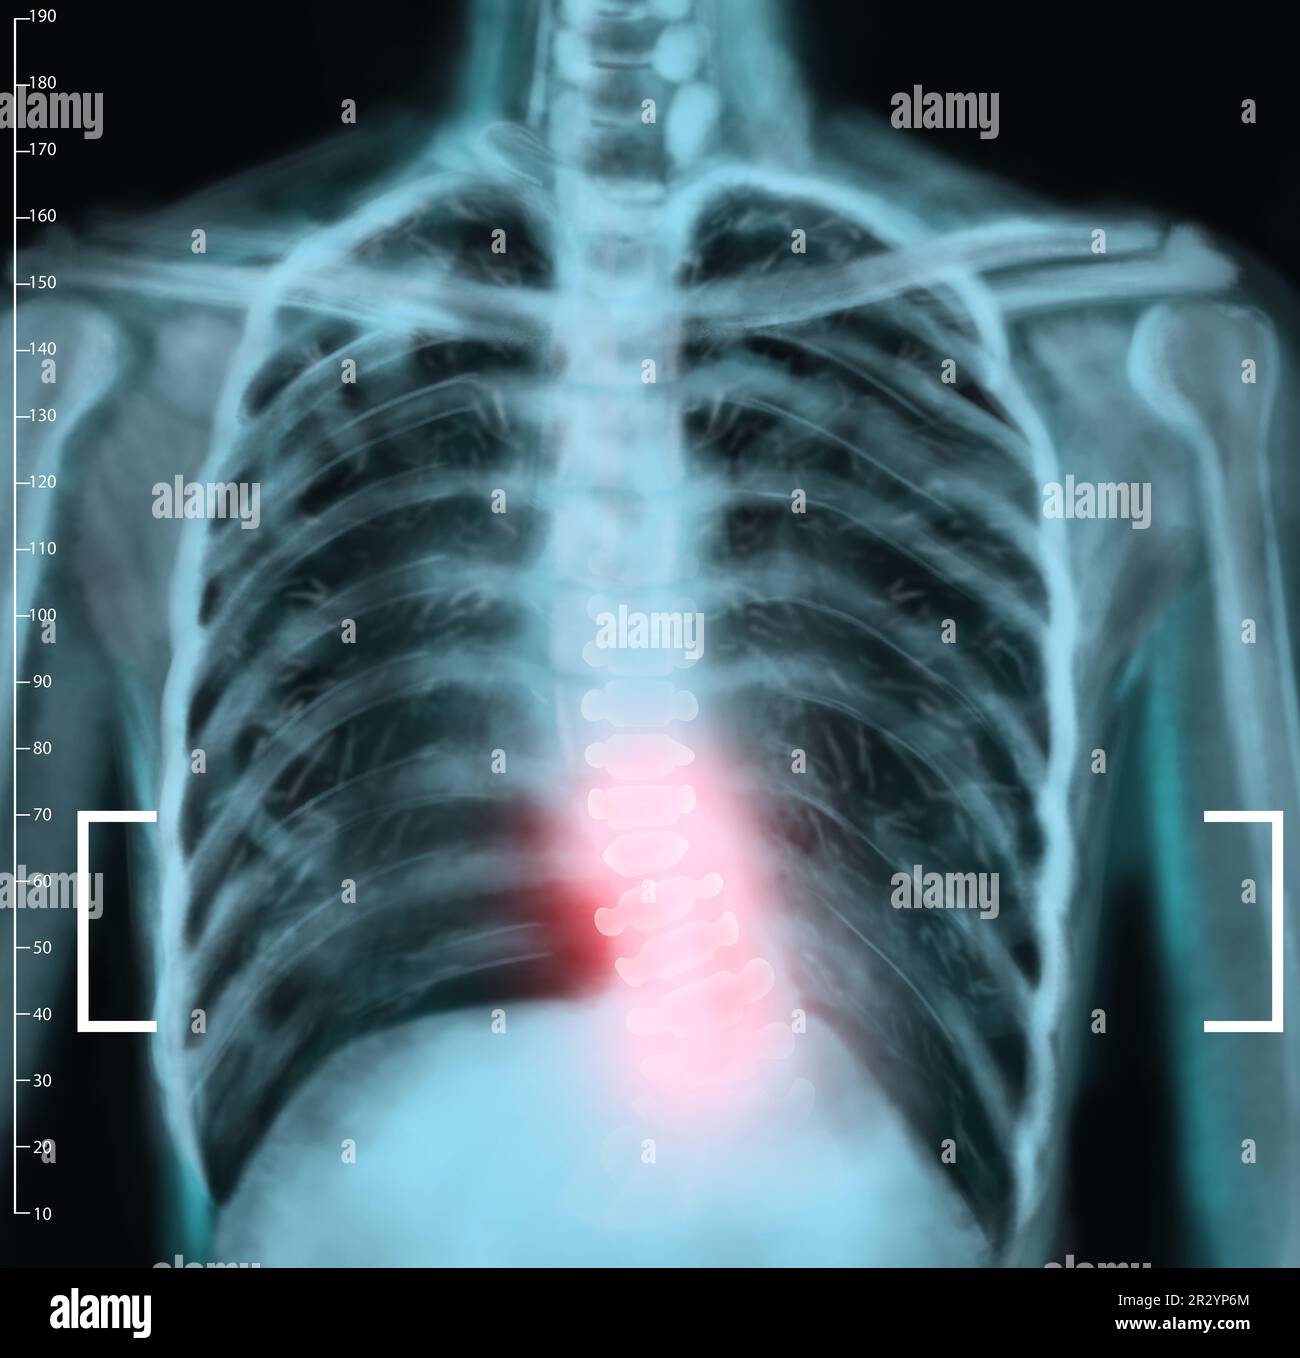 X-ray of human spine showing curvature. Patient suffering from scoliosis Stock Photo